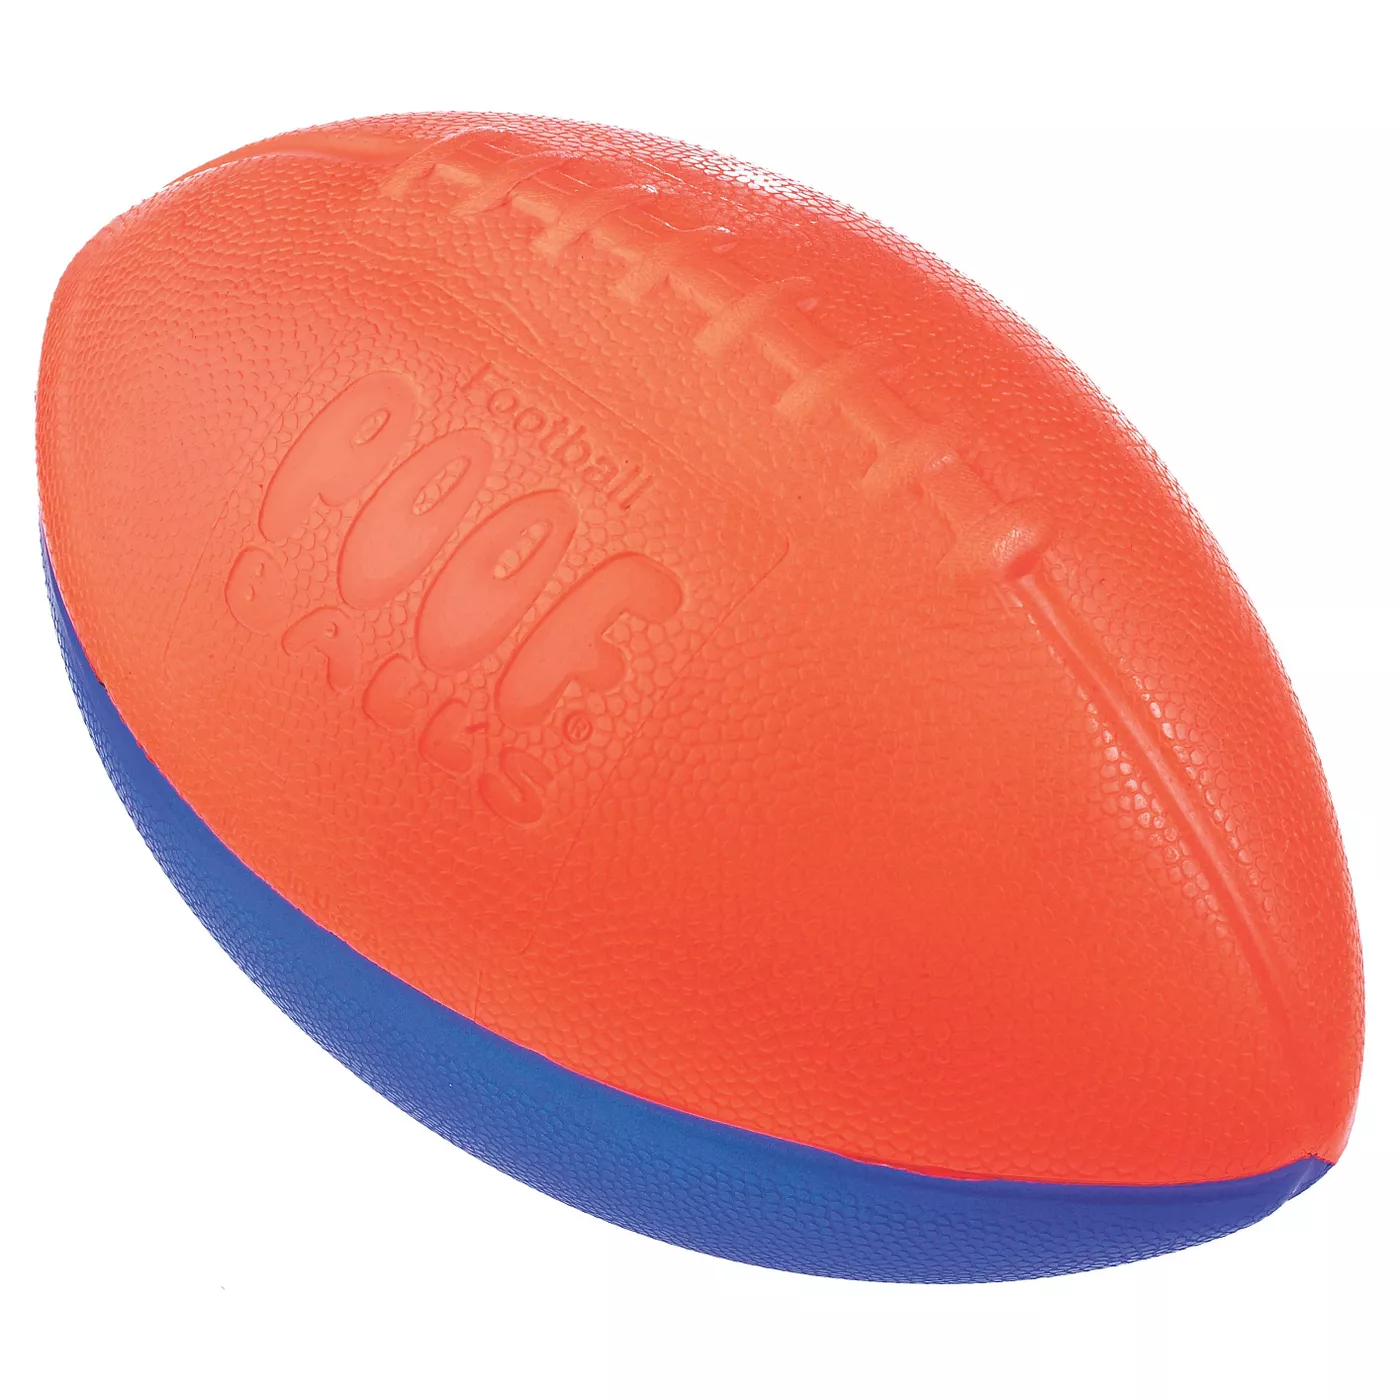 Foam Foot Ball Refreshed Colors - image 1 of 14